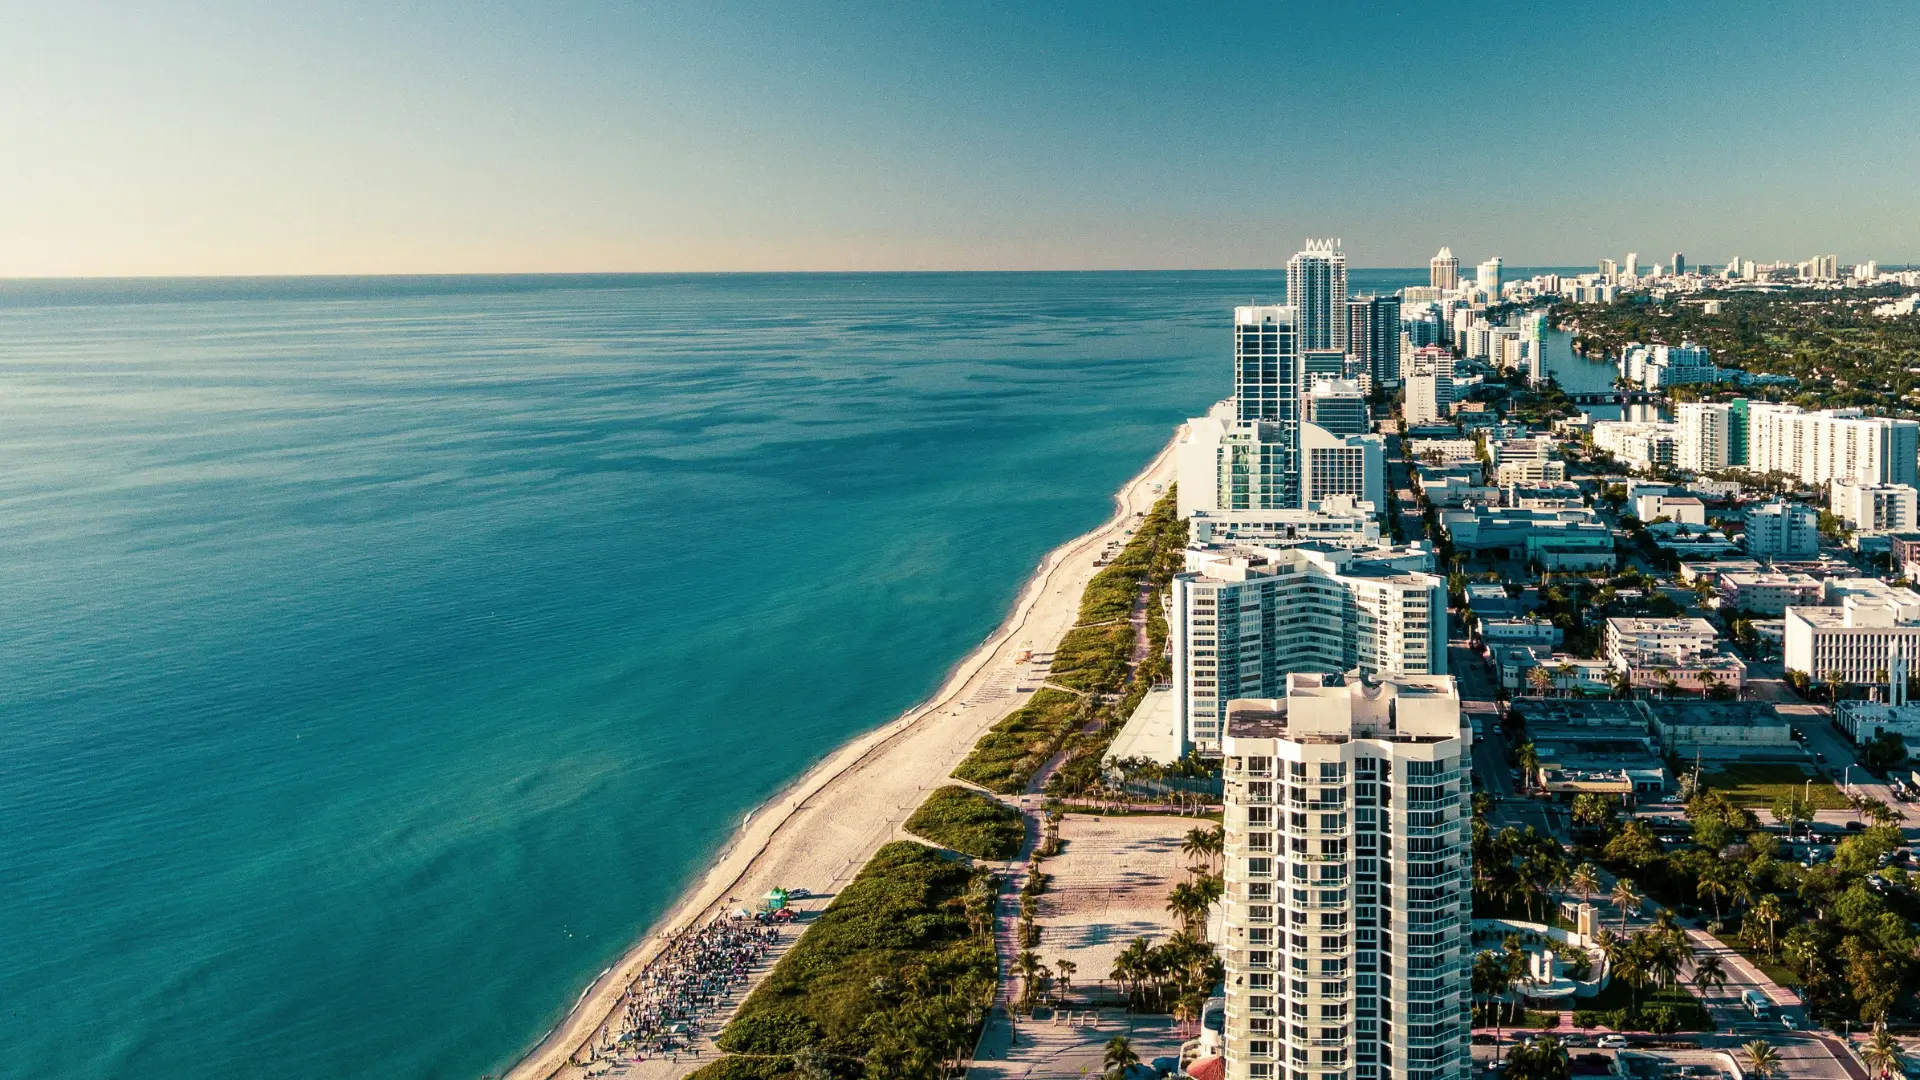 High up view of Miami shoreline with buildings and people